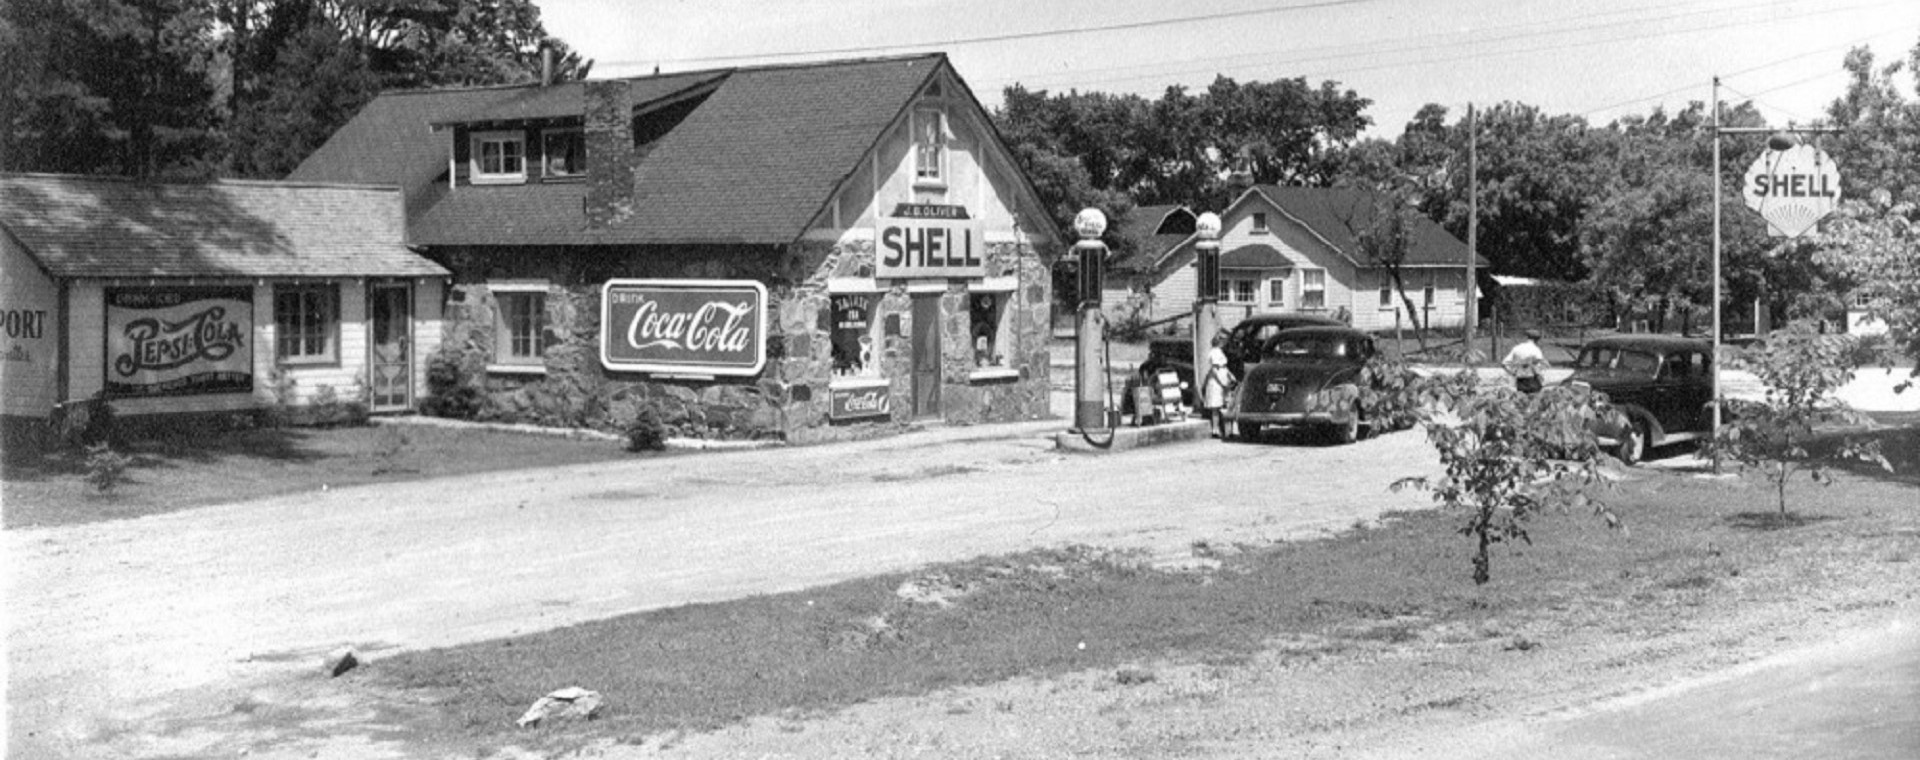 Black-and-white image of vintage cars parked in front of gas pumps with stone building in background